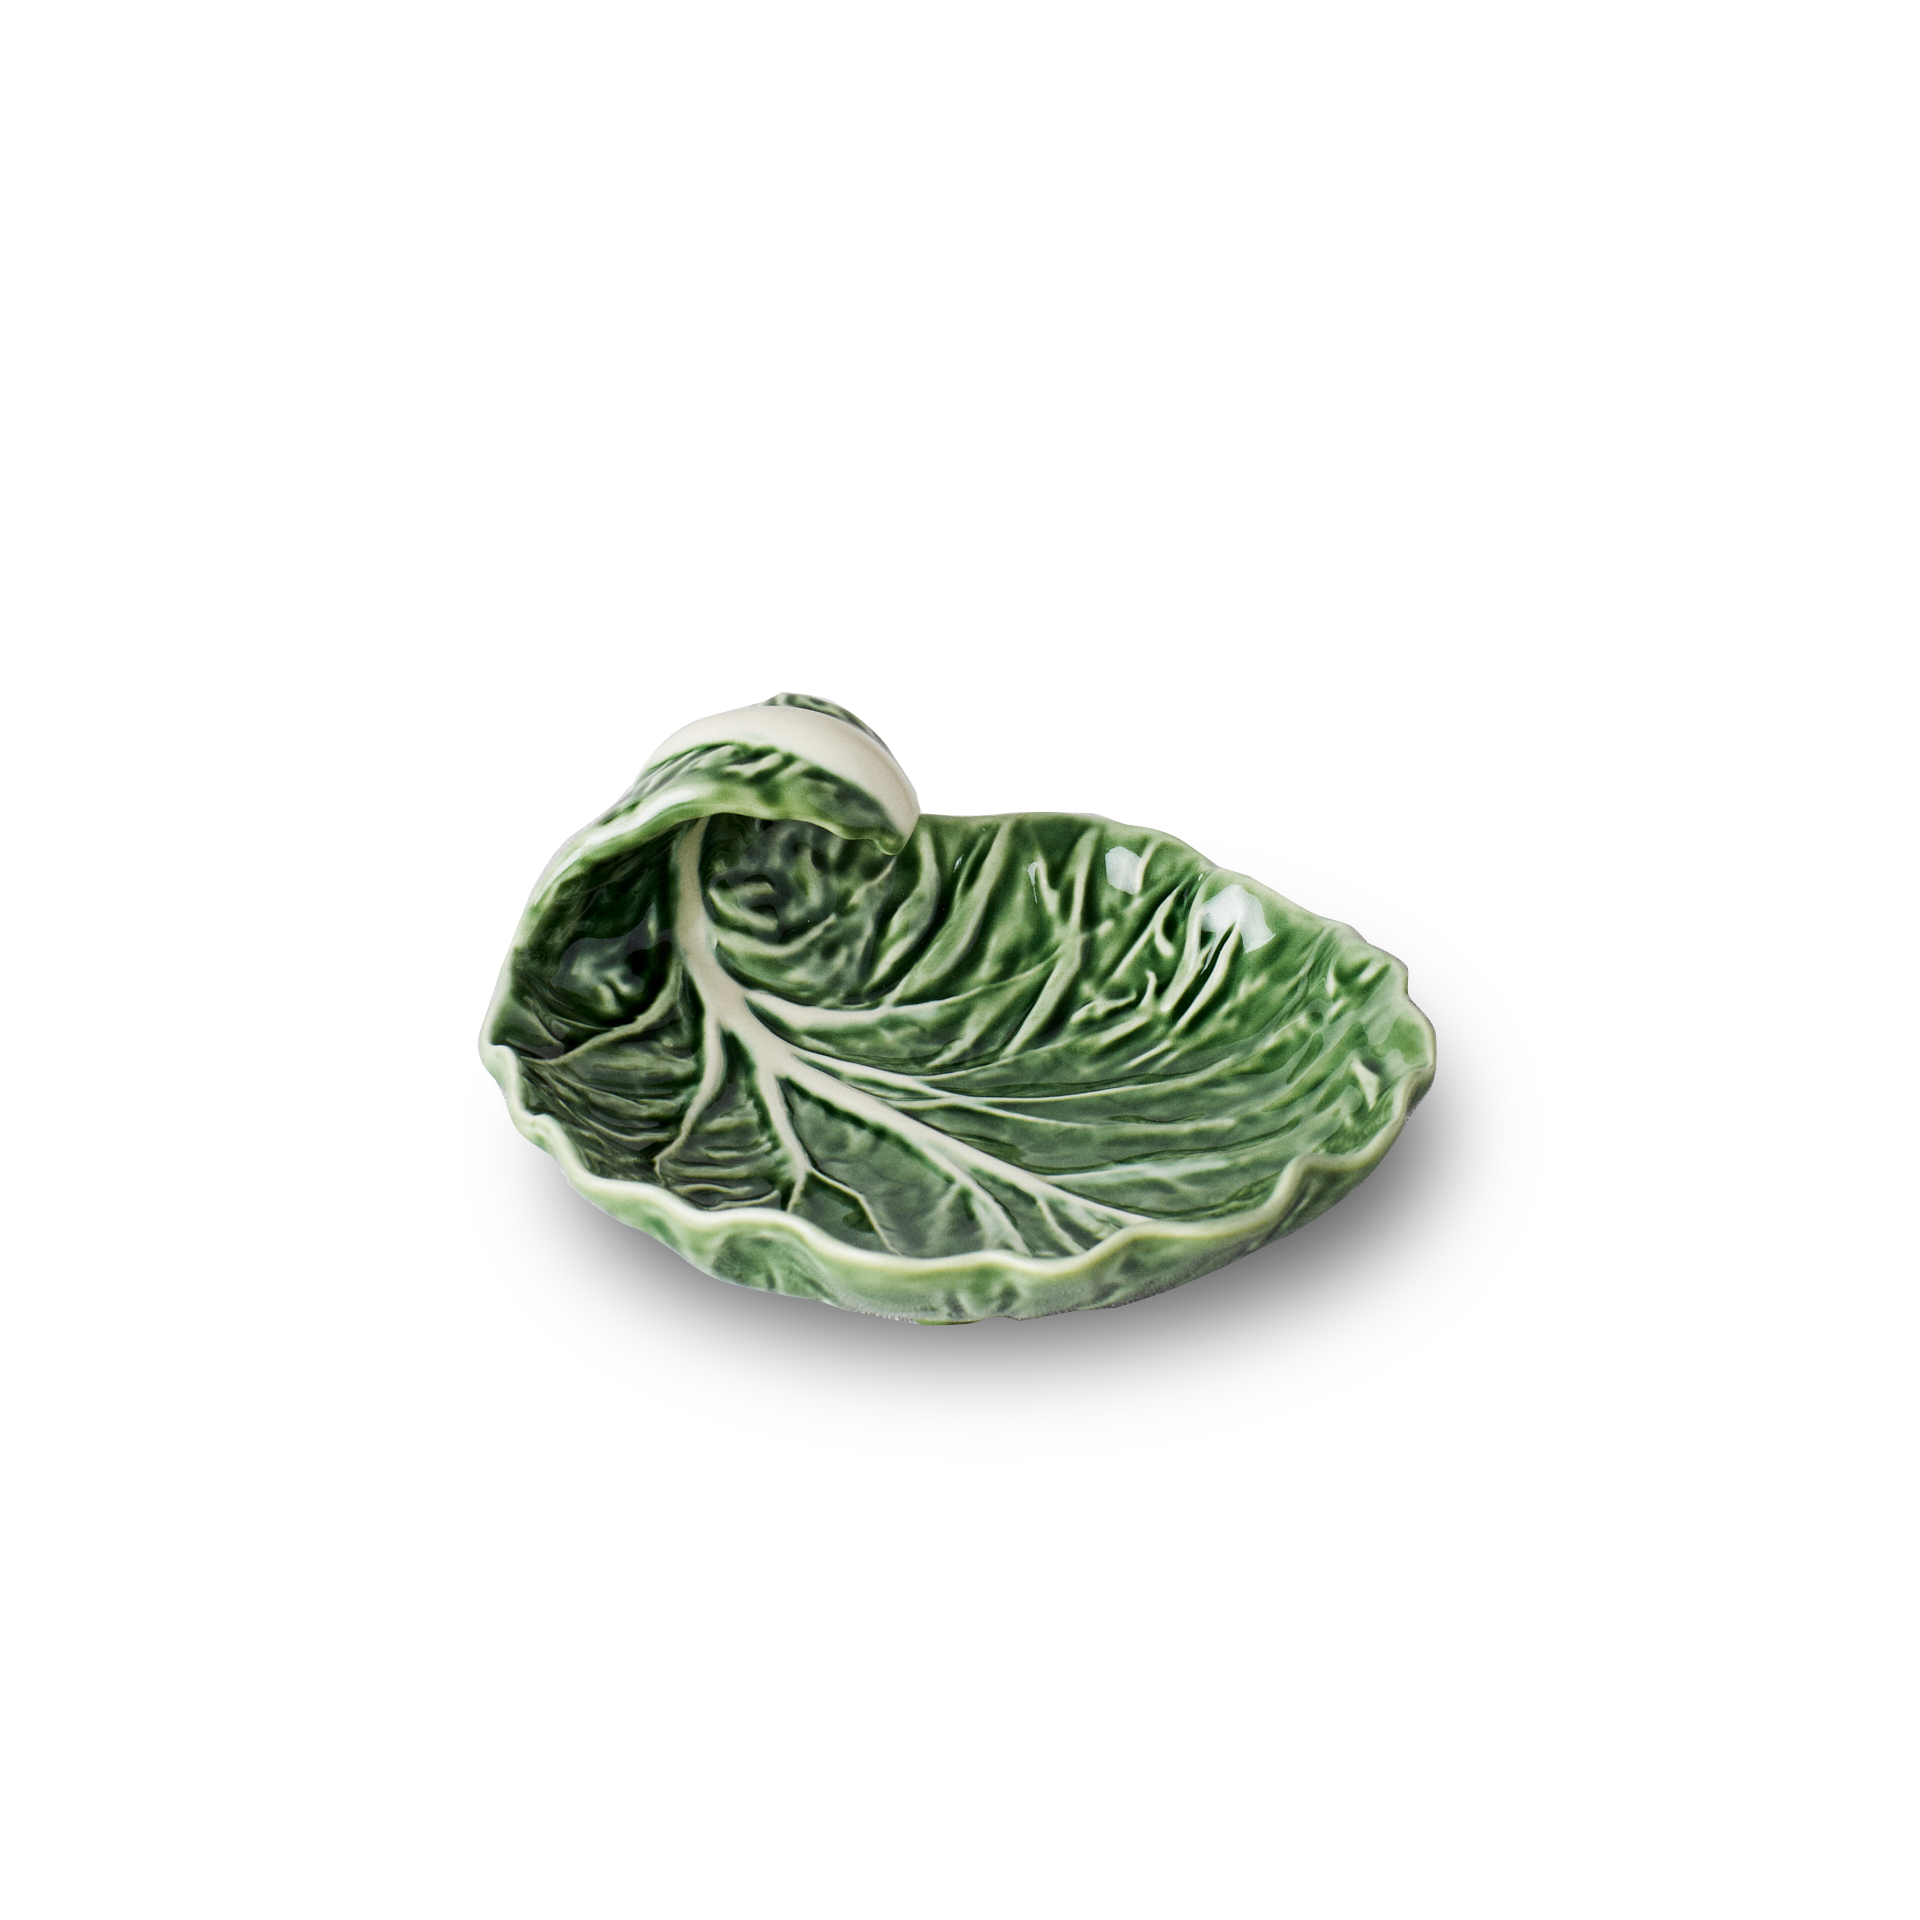 Rent: Small Green Cabbage Leaf Dish